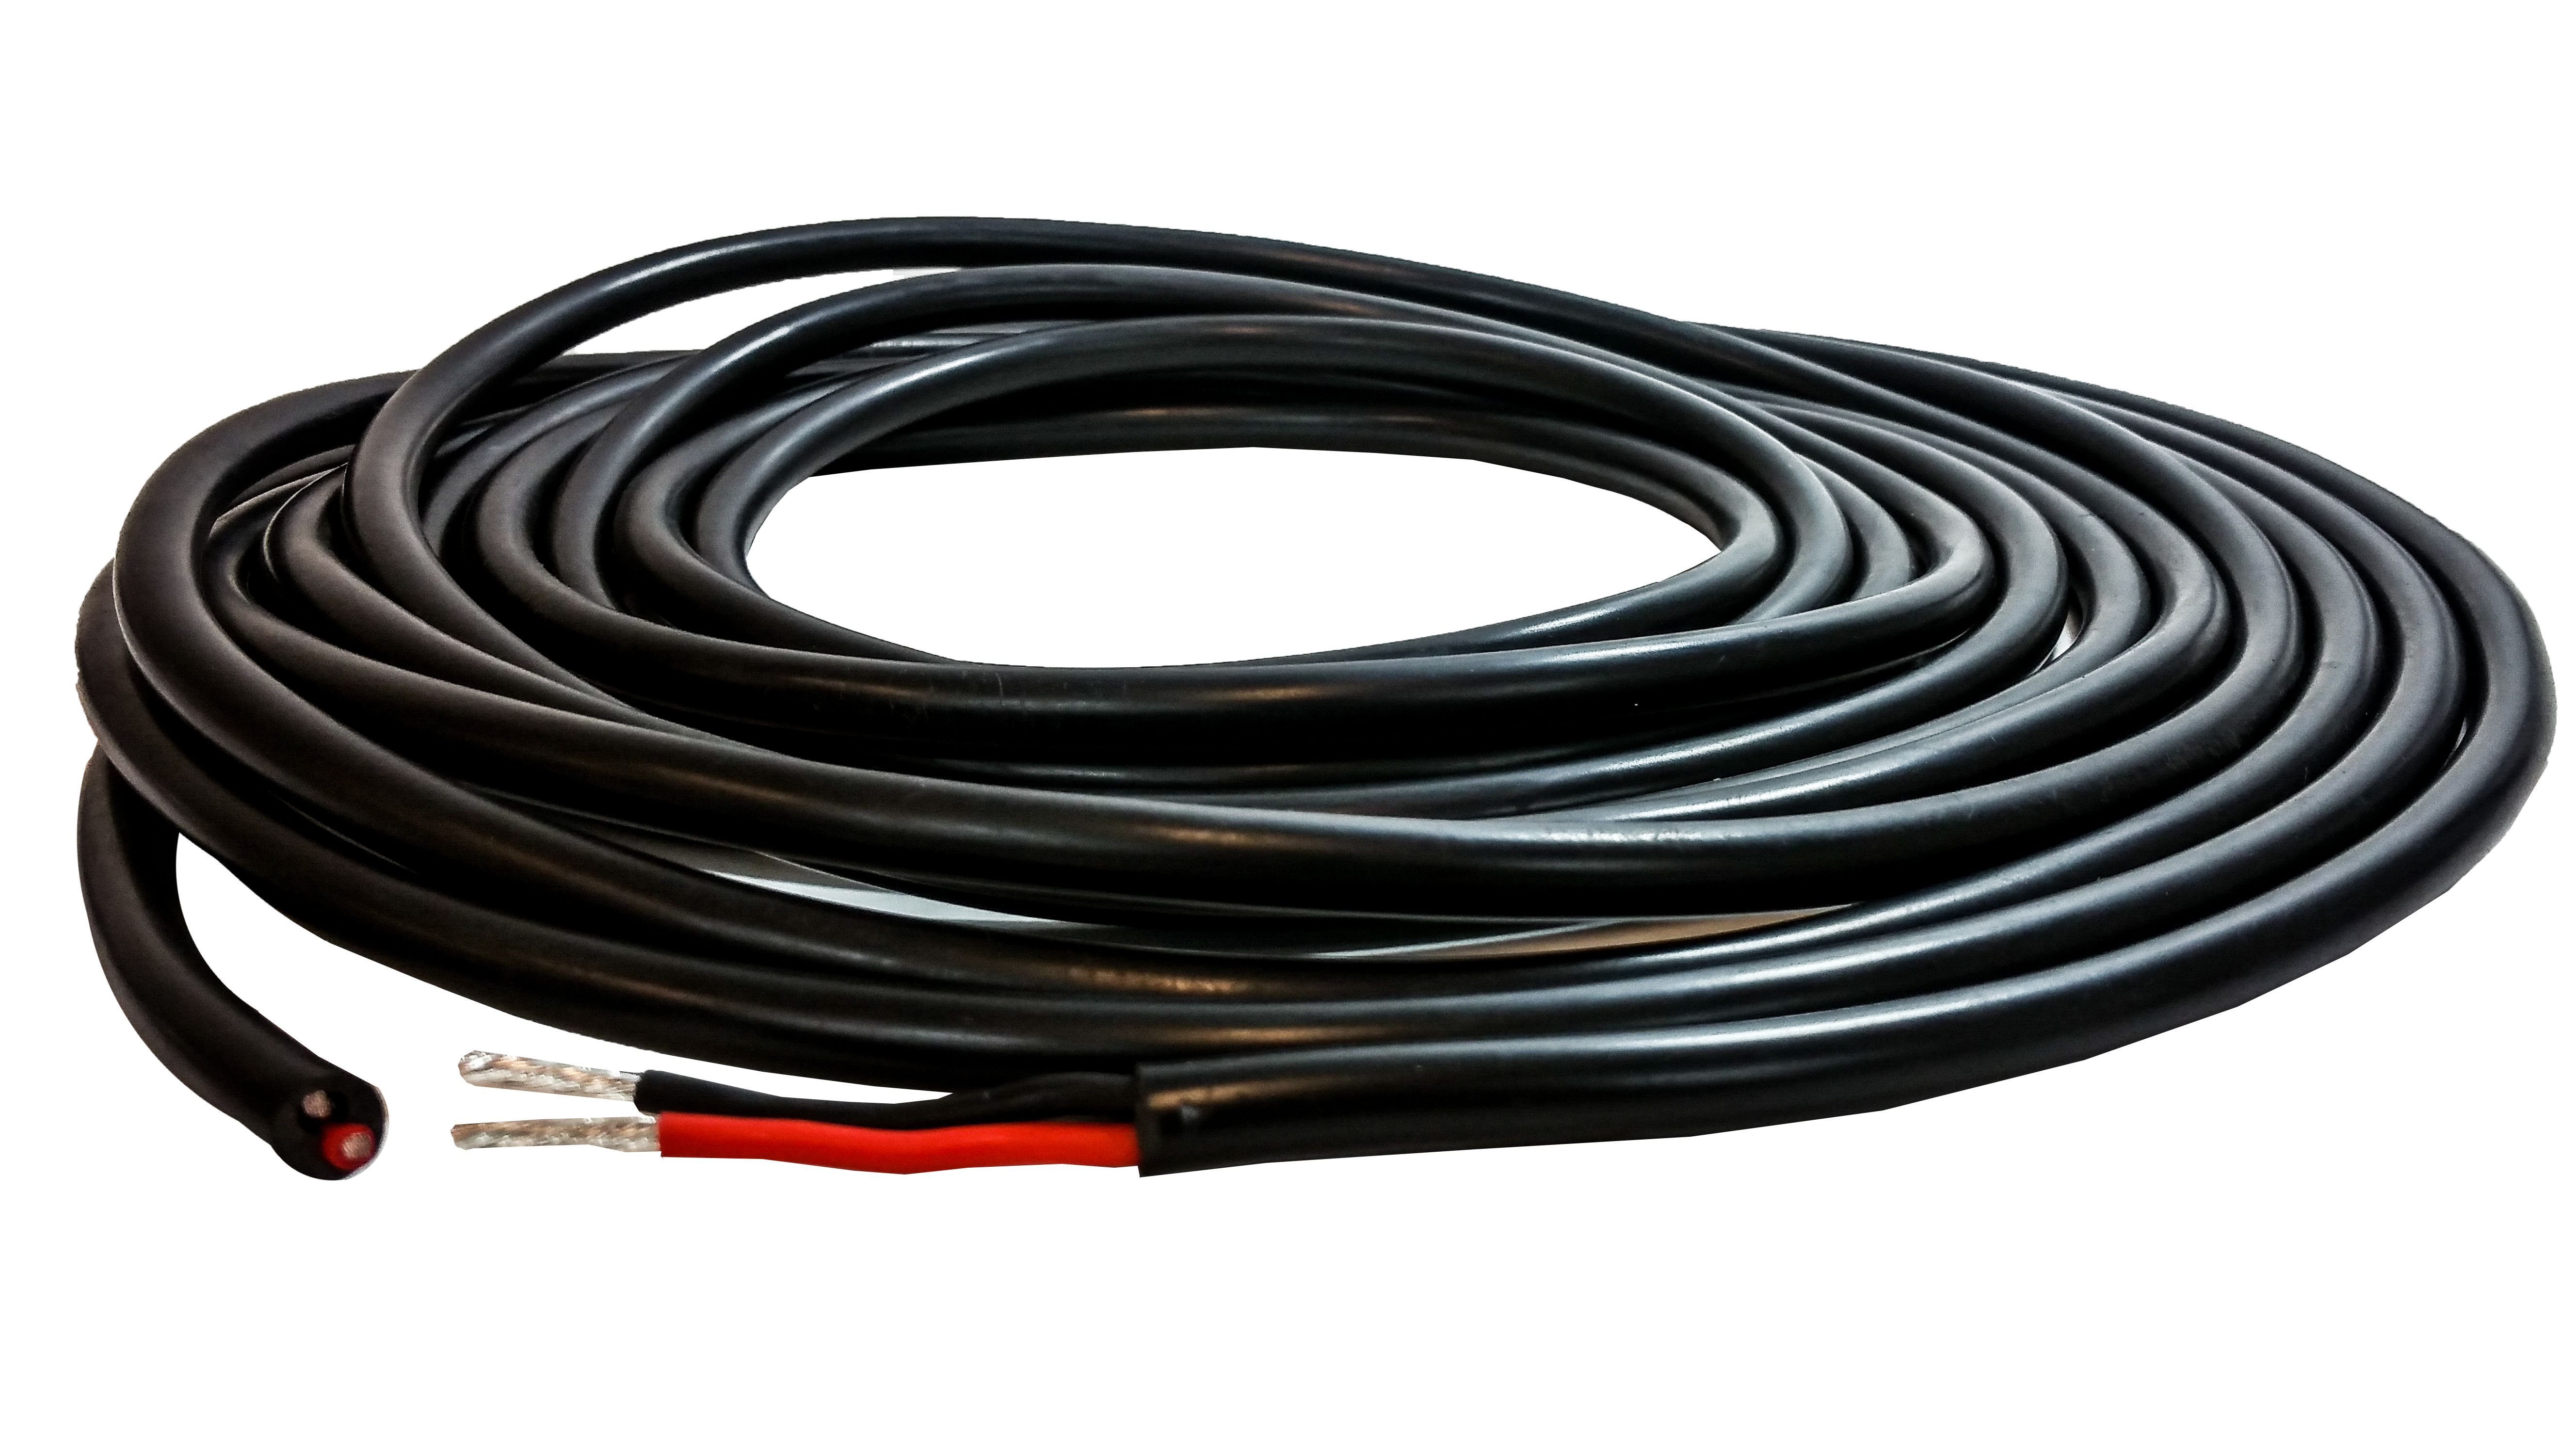 14 AWG 10 ft OZ-USA 2 Wire 12v 24v cable car truck marine boat light led bar electrical wiring industrial - image 1 of 4